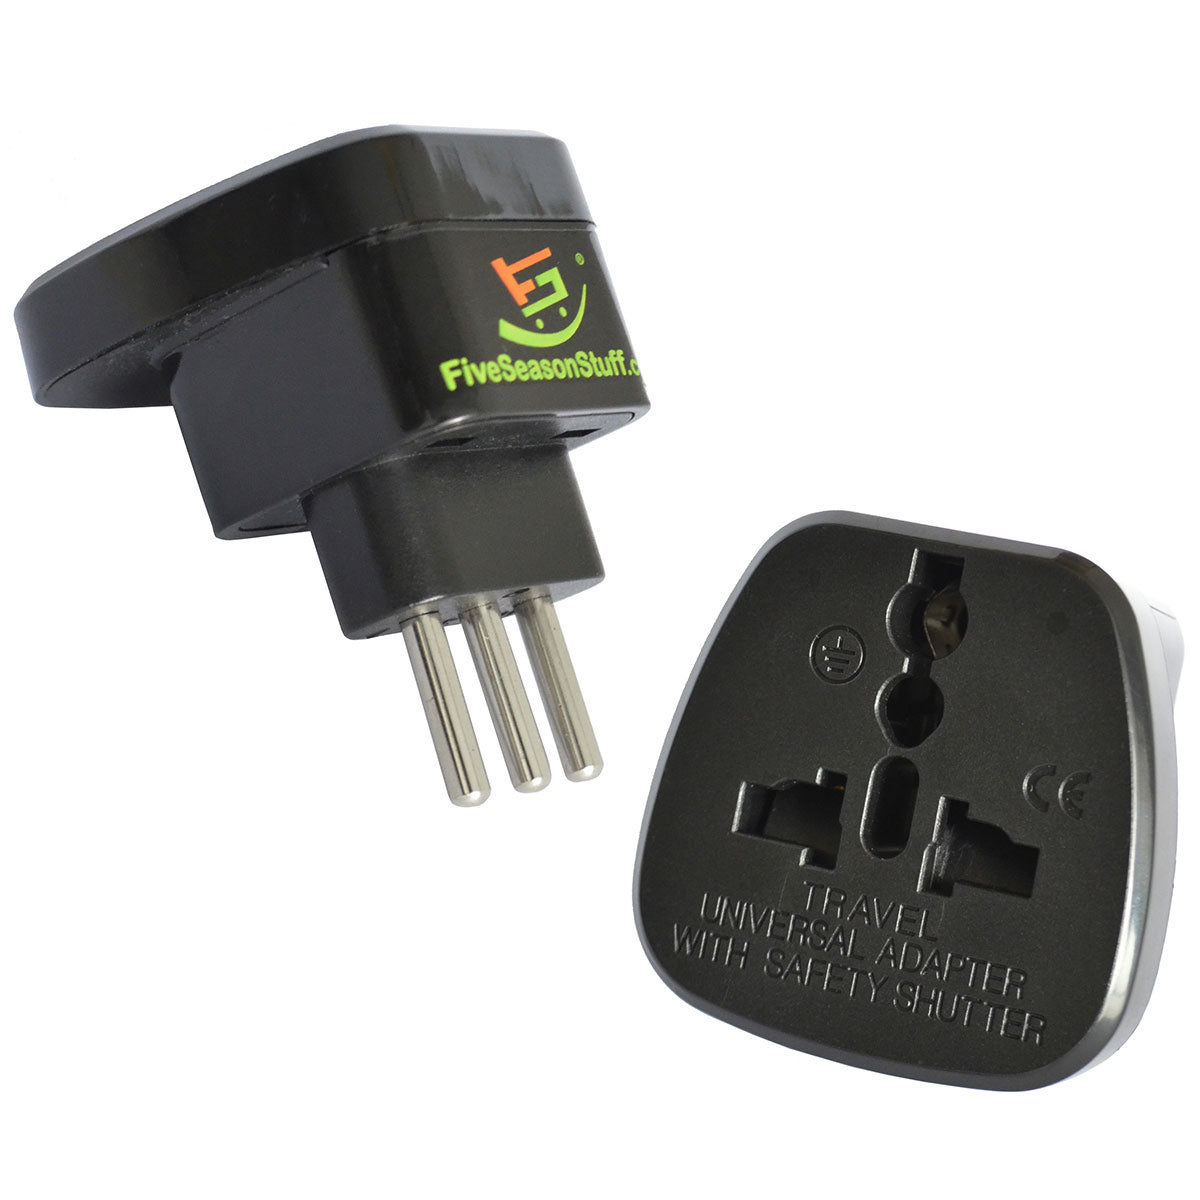 1 Travel Adapter for Traveling to Italy (Black) Type L